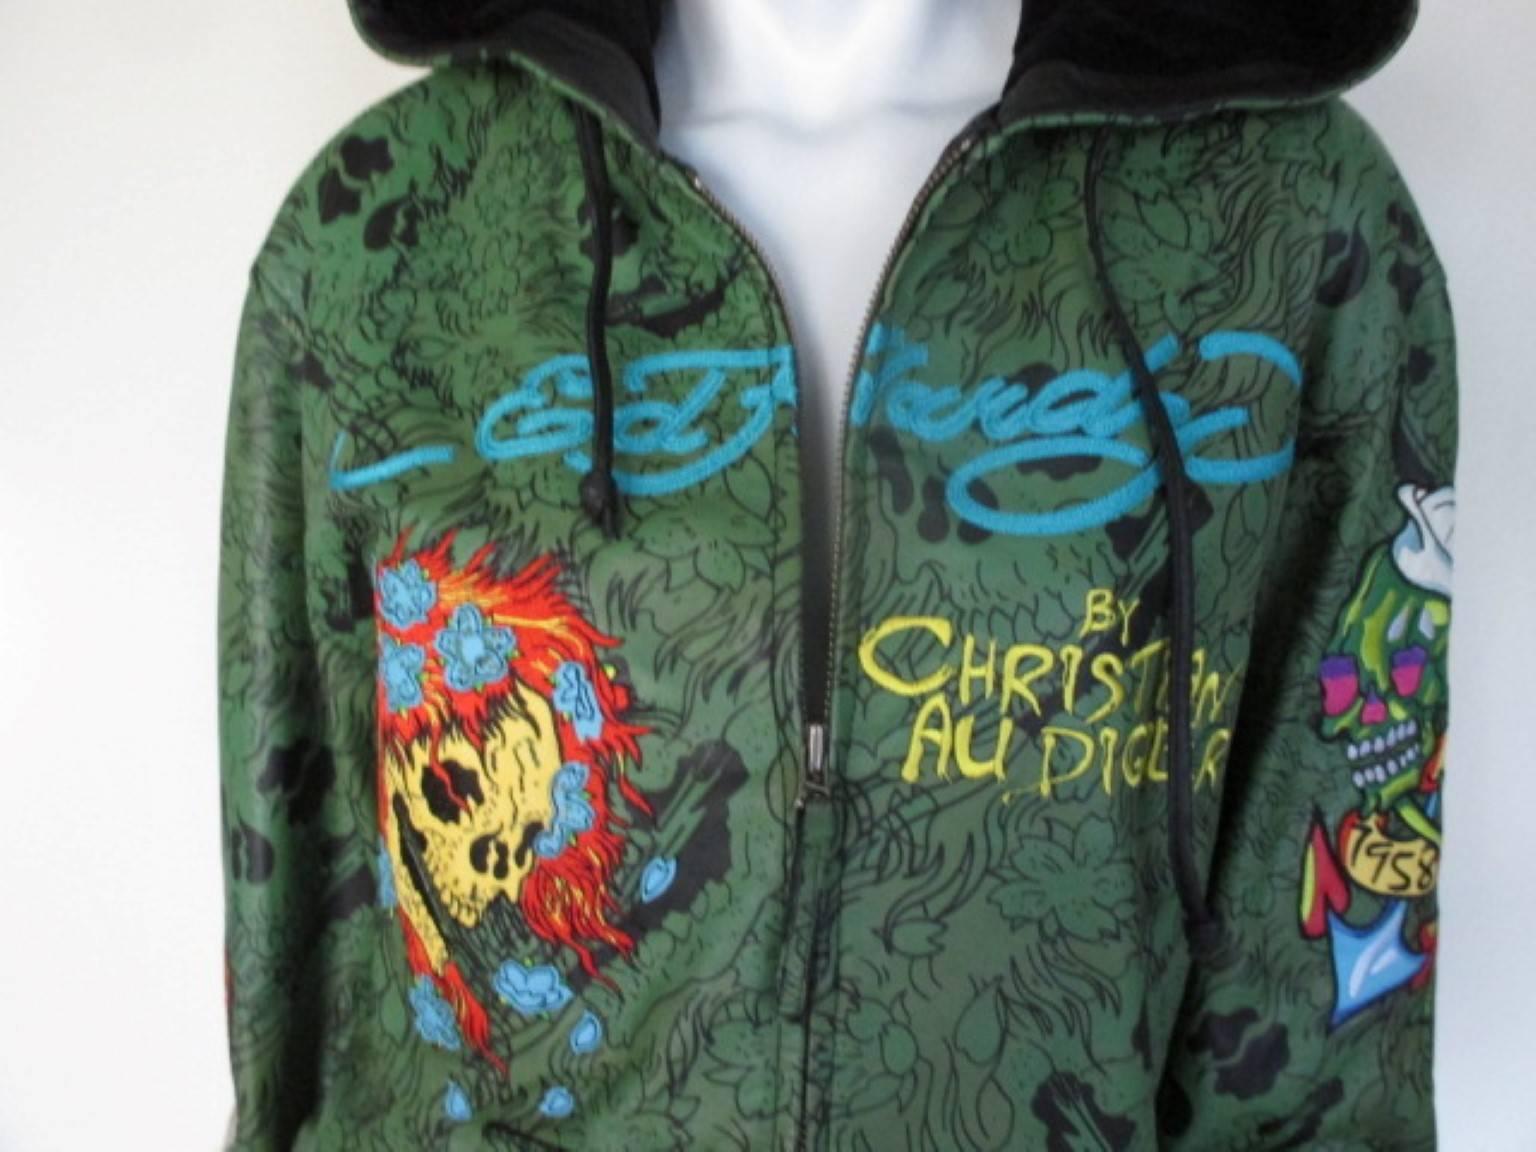 This leather jacket is made by the French designer Christian Audigier who past away in 2015.
He was famous for his rock and roll inspired designs.
The jacket has 2 pockets, a zipper closing and black velvet lining.
It can be worn by man or woman